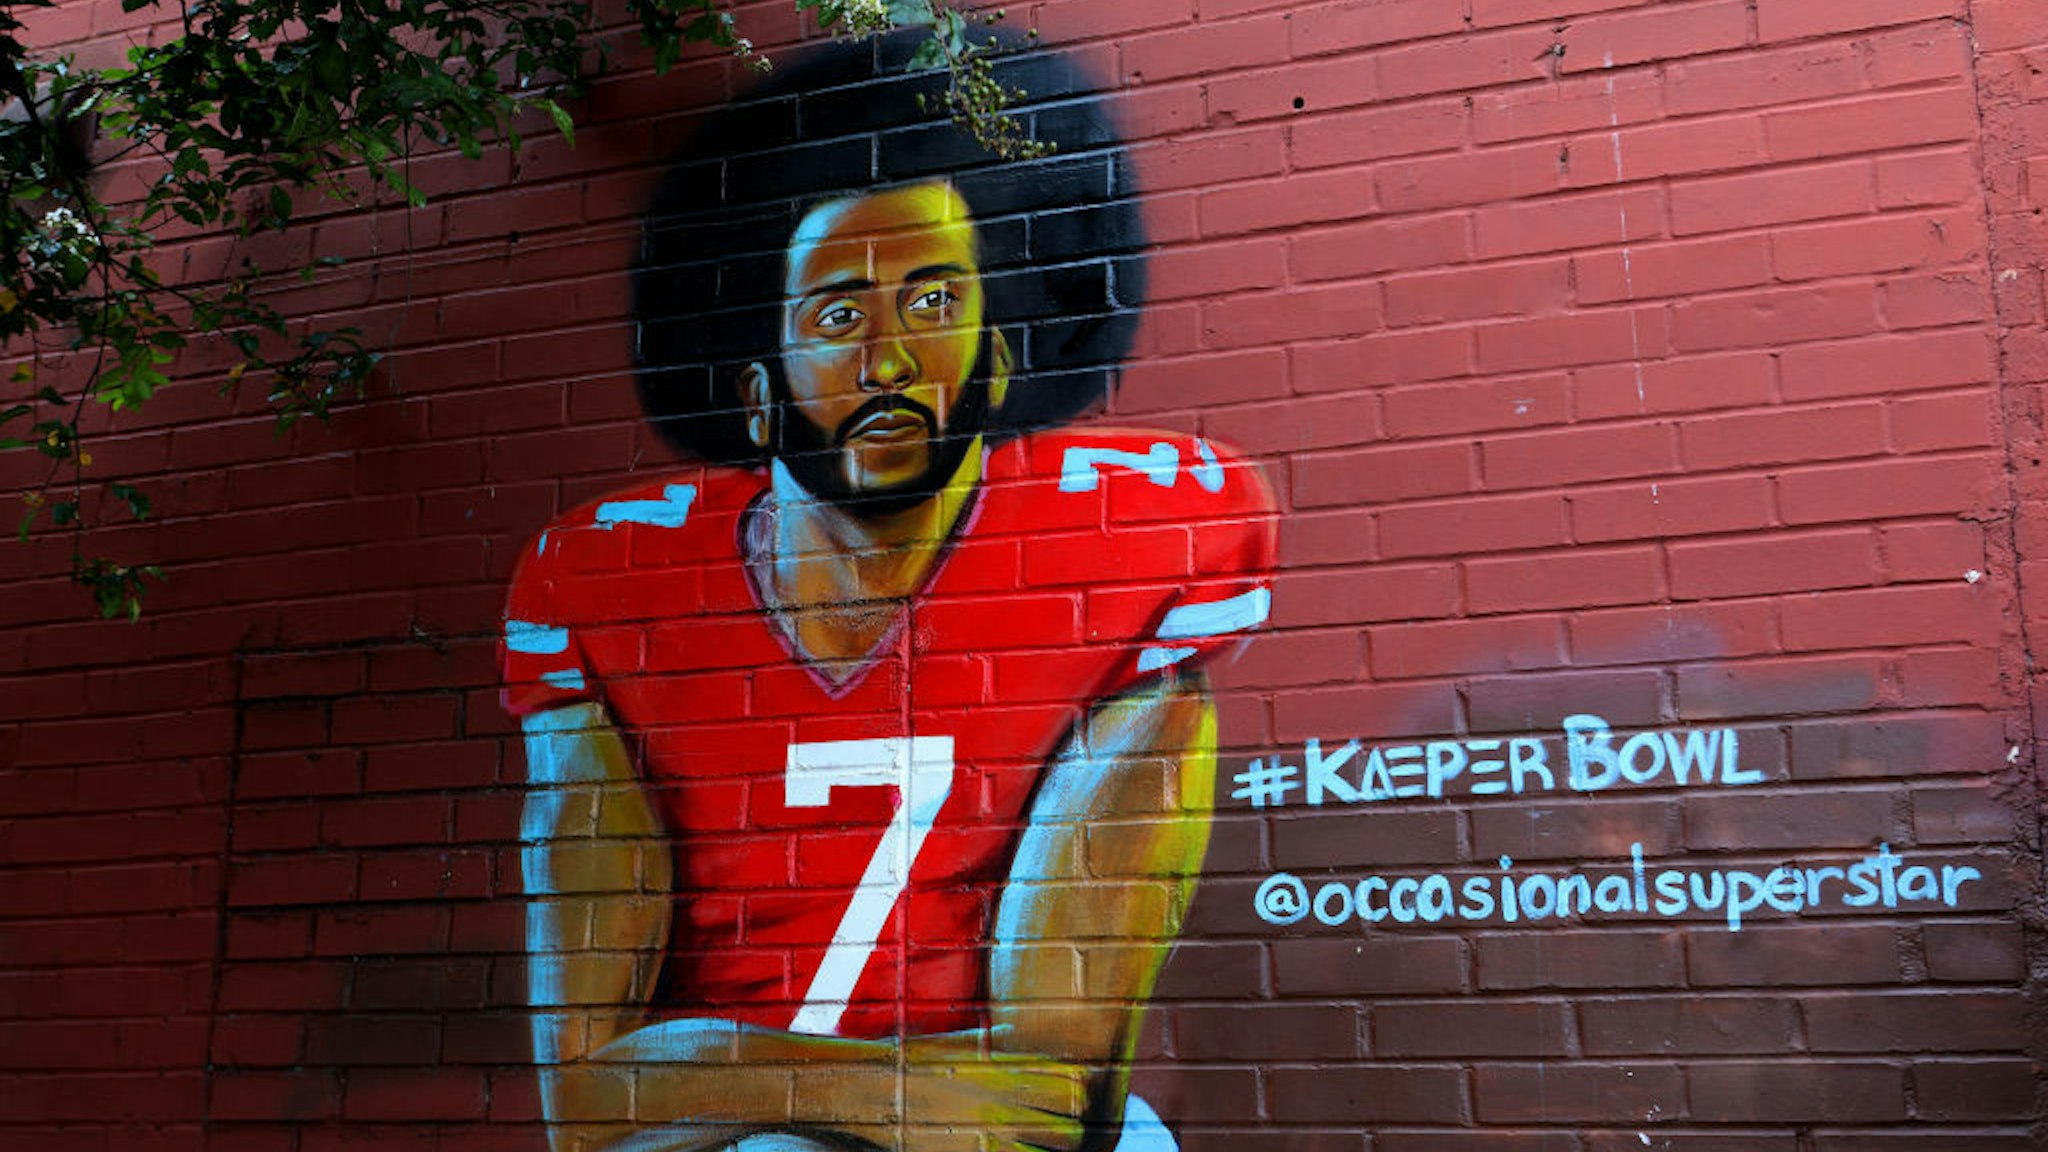 Muhammad Yungai's 'Colin Kaepernick' mural is displayed in the Old Fourth Ward neighborhood in Atlanta, Georgia on July 27, 2019. (Photo By Raymond Boyd/Getty Images)